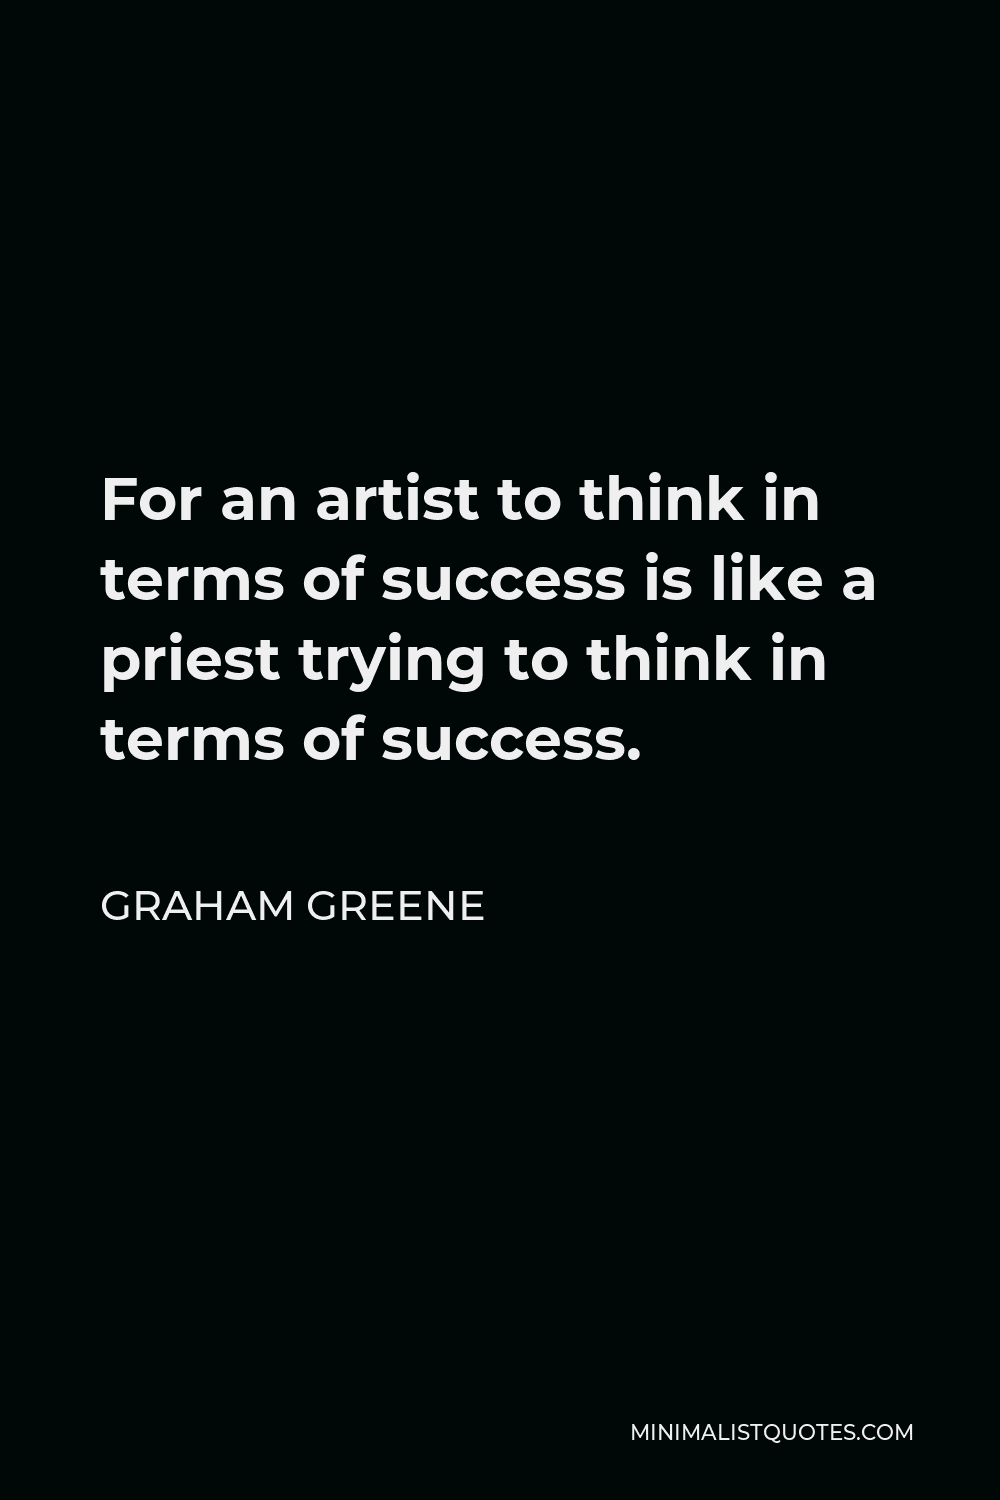 Graham Greene Quote - For an artist to think in terms of success is like a priest trying to think in terms of success.